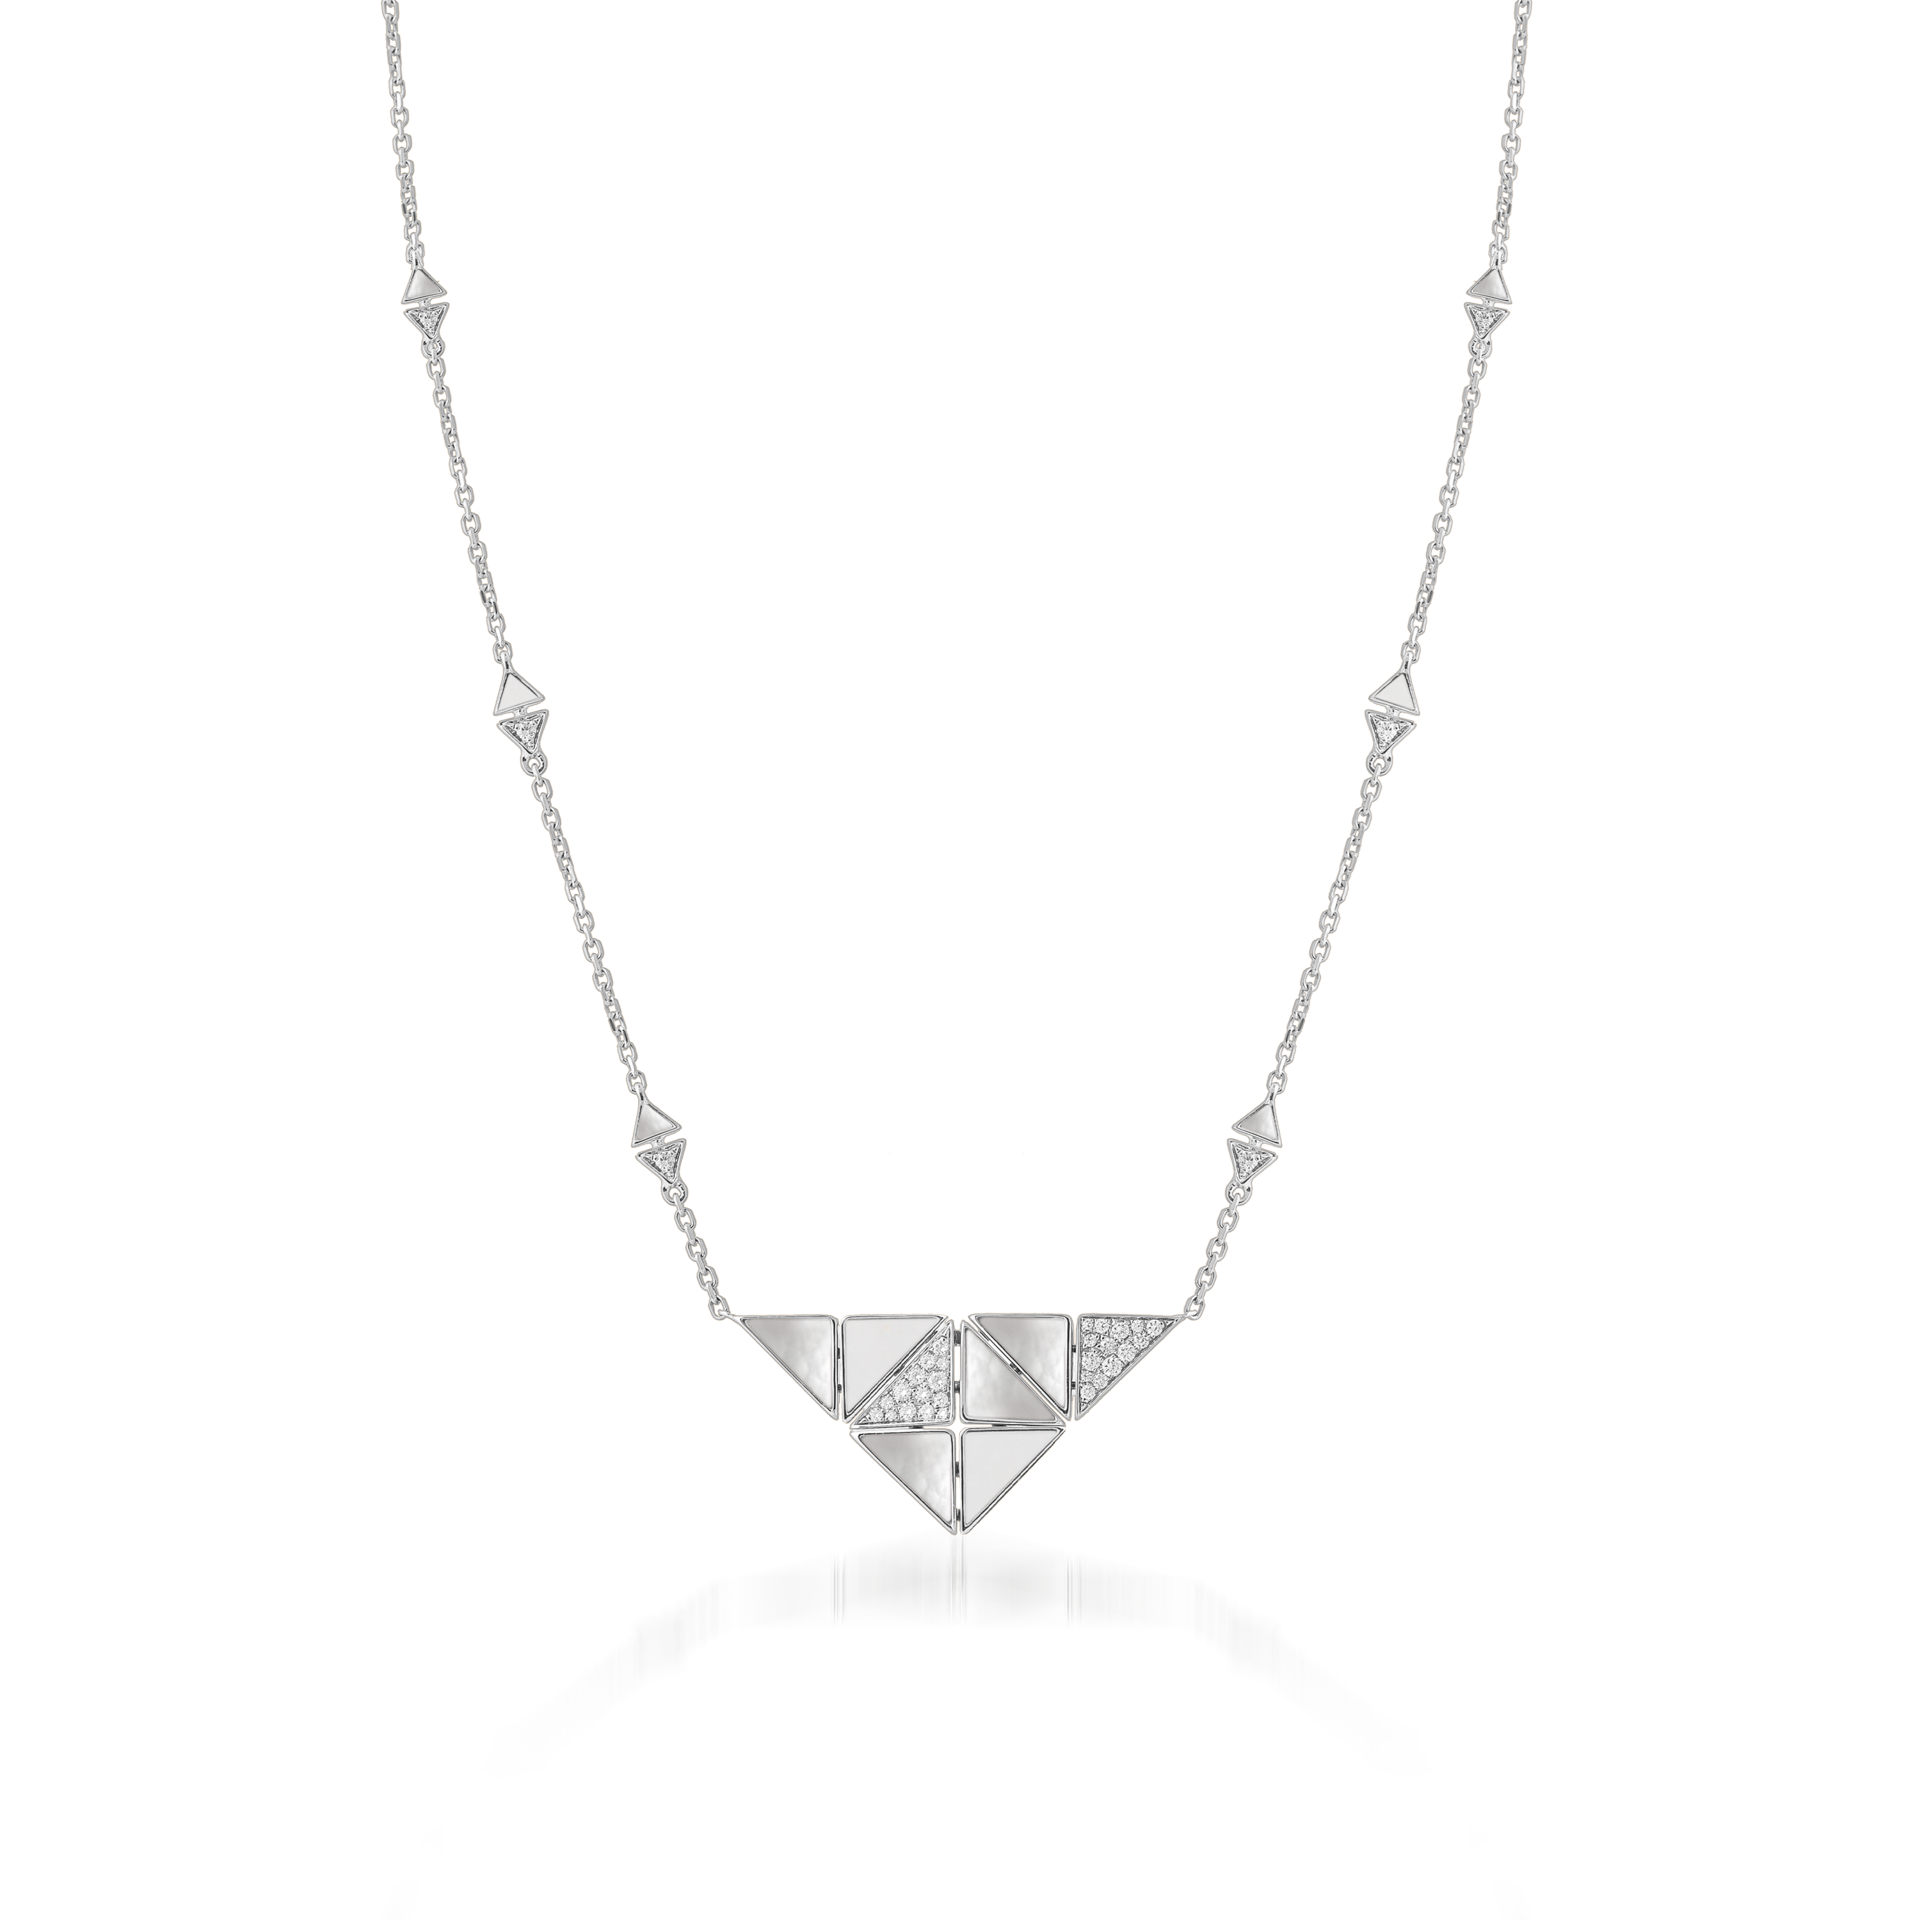 Deco Quadratic Necklace with White Agate, White Mother of Pearl and Diamonds  In 18K White Gold